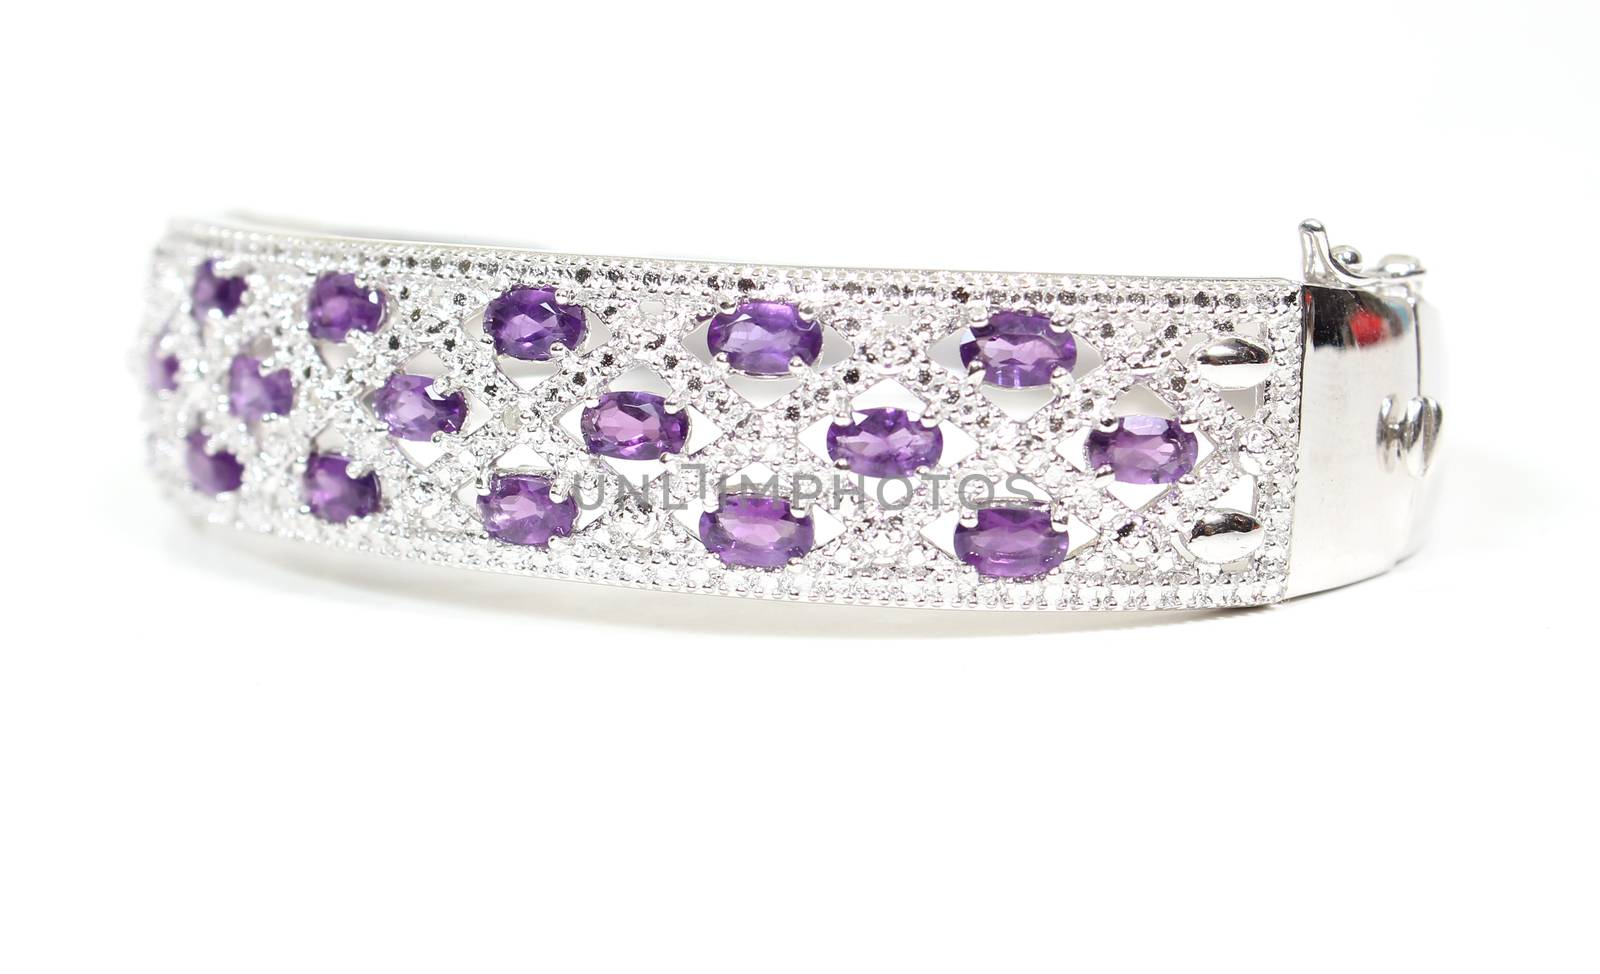 Sterling Silver and Amethyst Bangle Bracelet by Marti157900